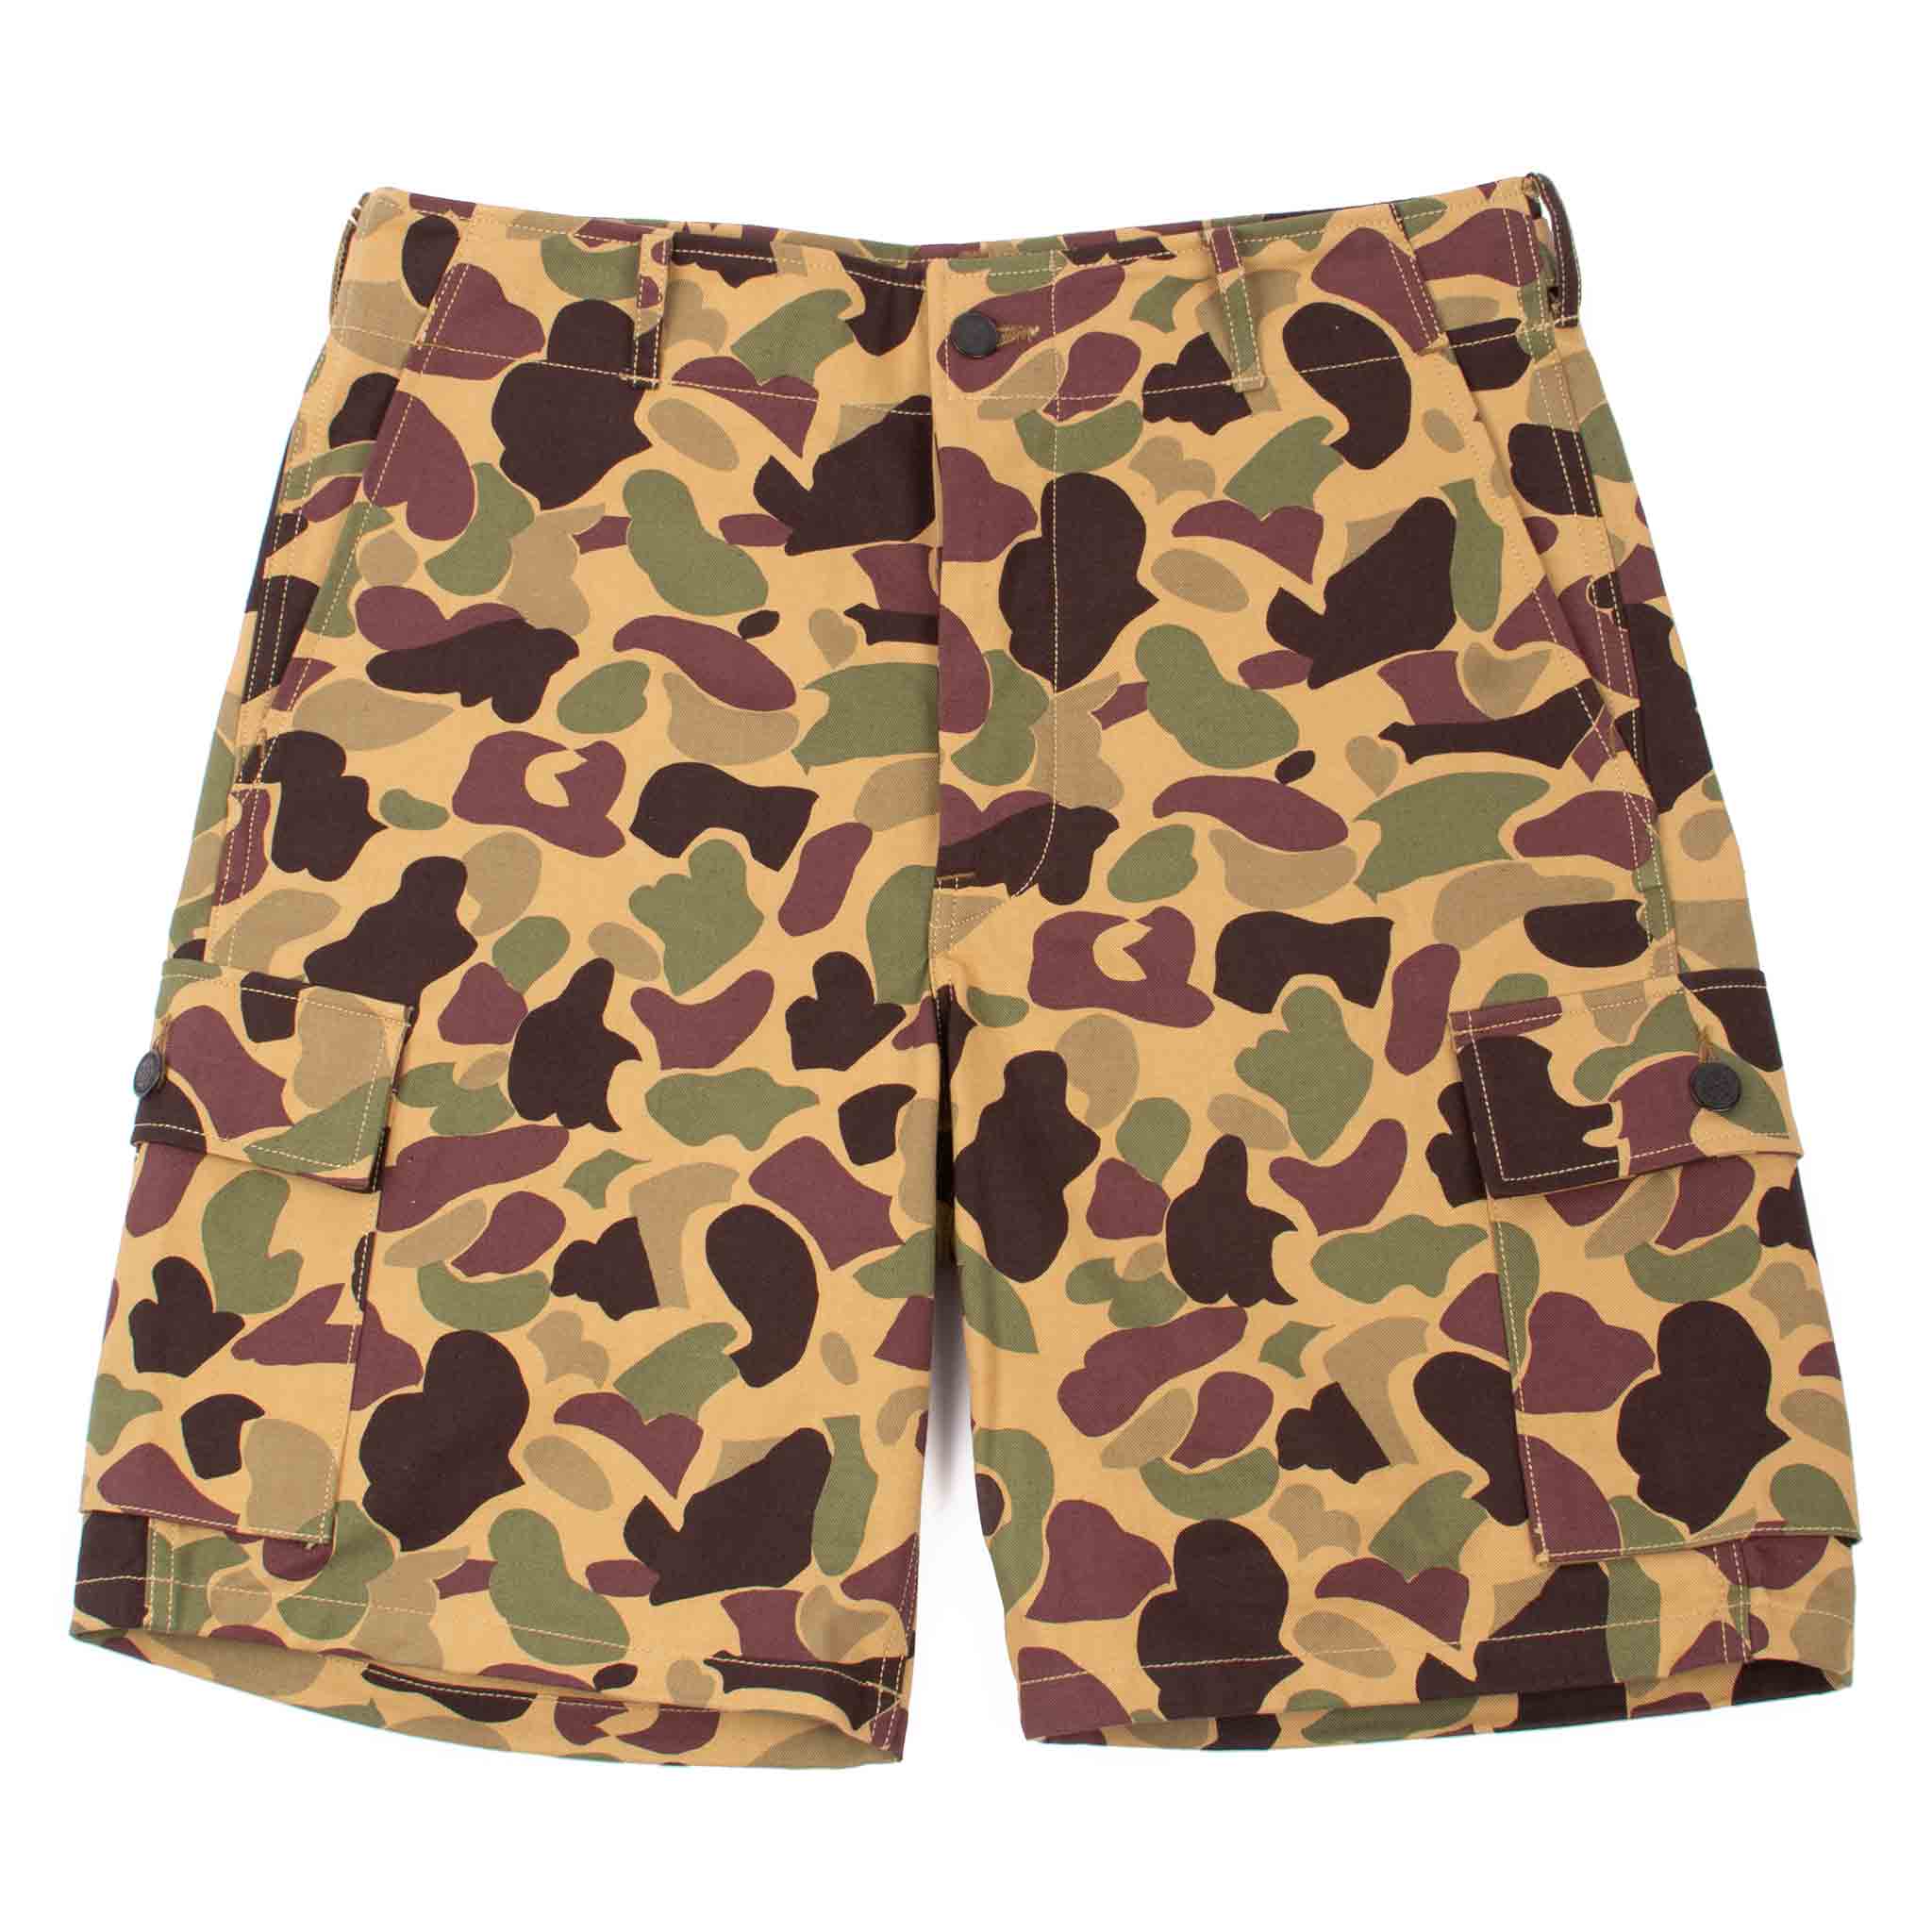 The Real McCoy's MP21006 Beo Gam Camouflage Shorts Beige